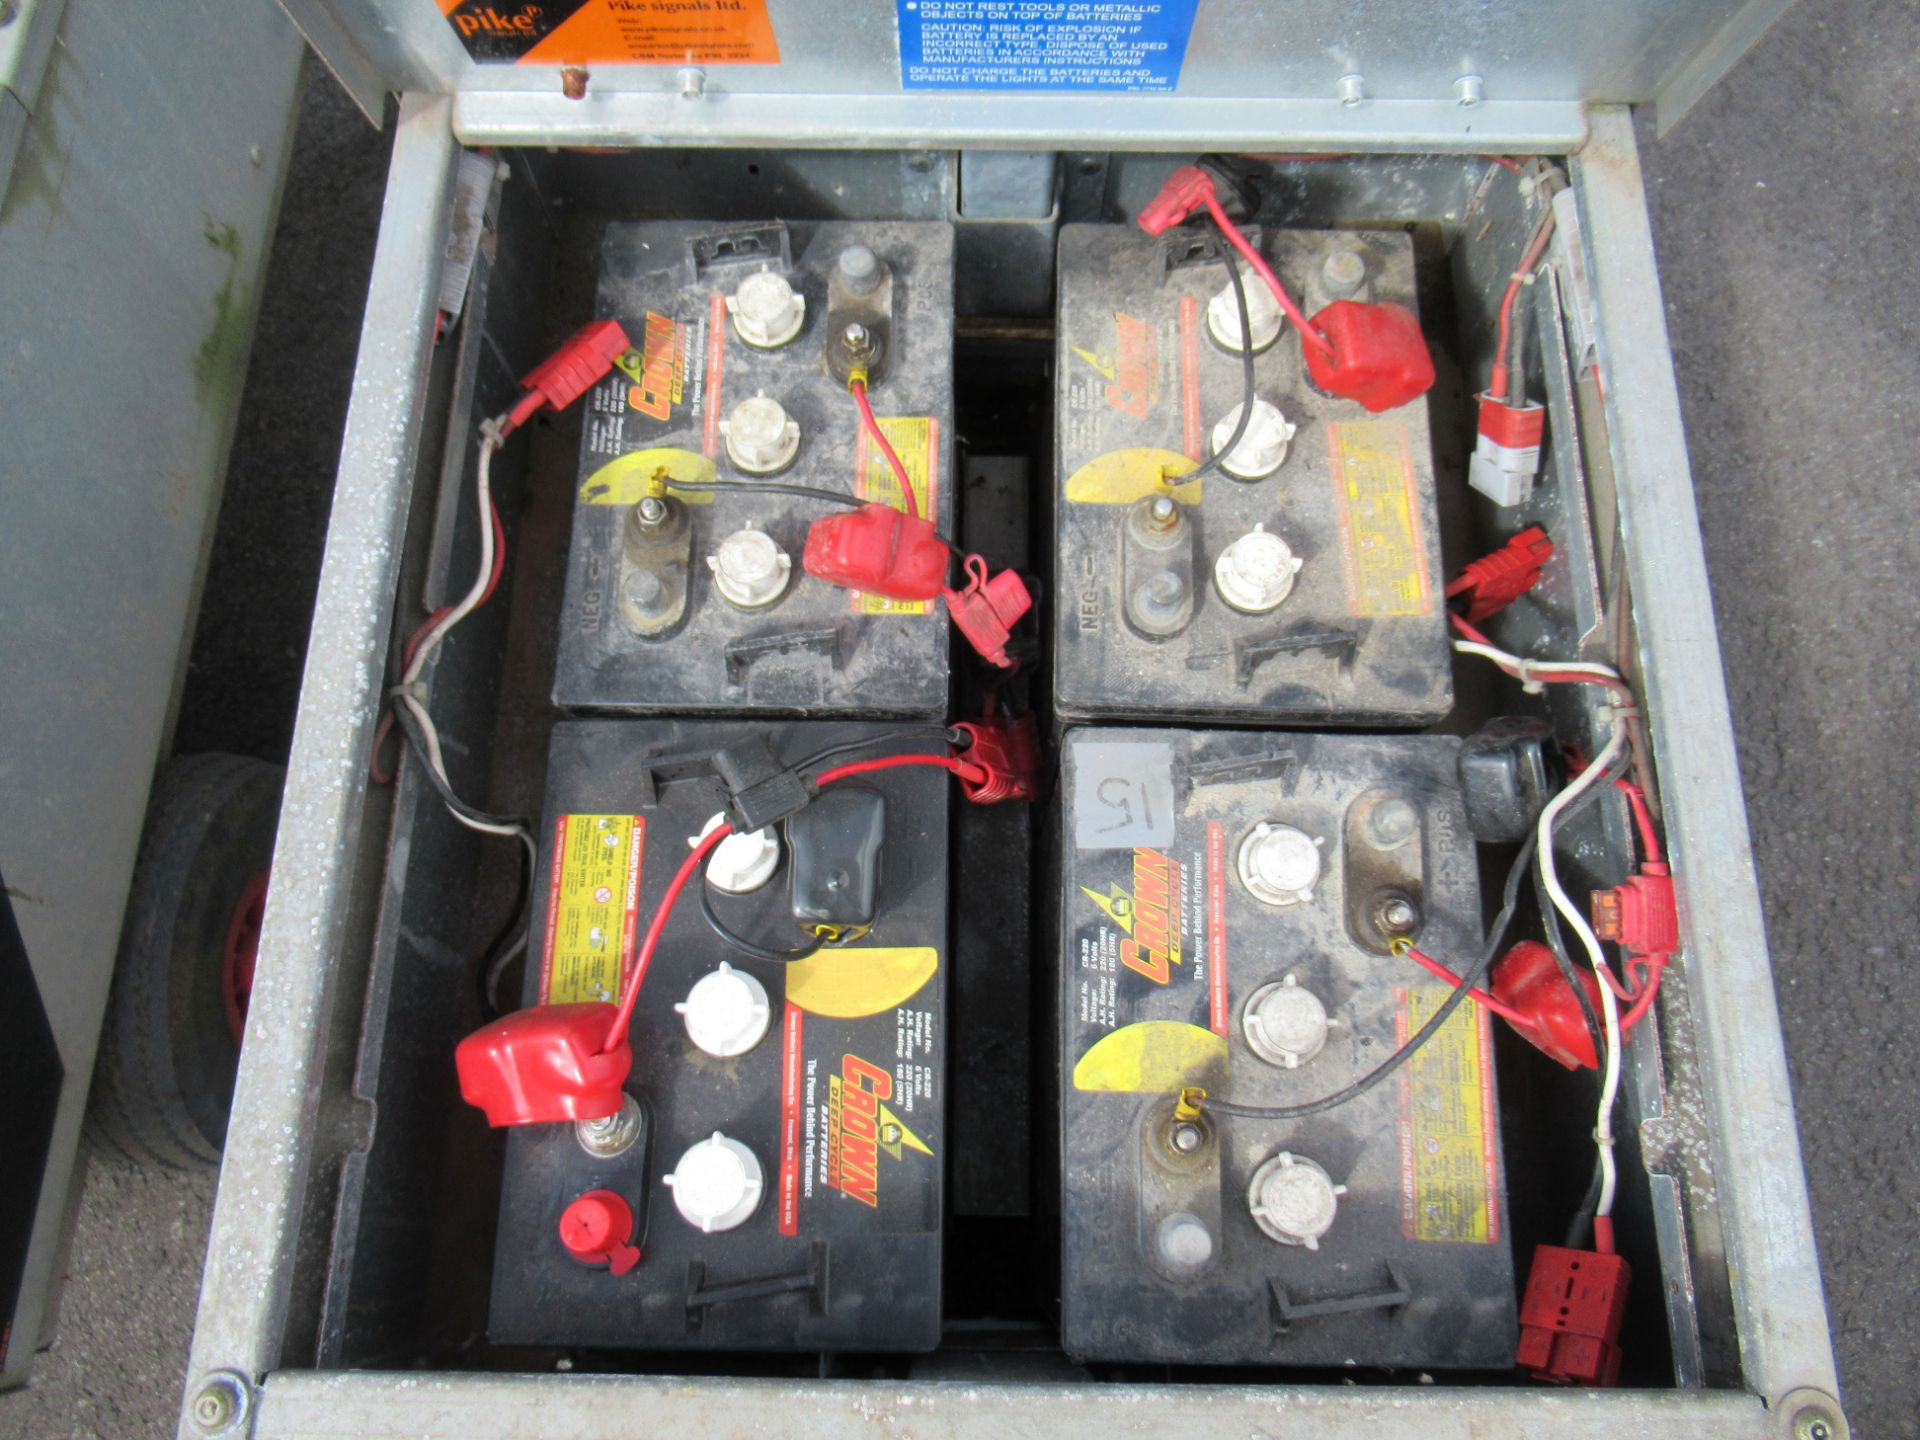 A Pair of Pike Signals Ltd "Pedestrian" Battery Powered Portable Traffic Light Units - Image 6 of 7